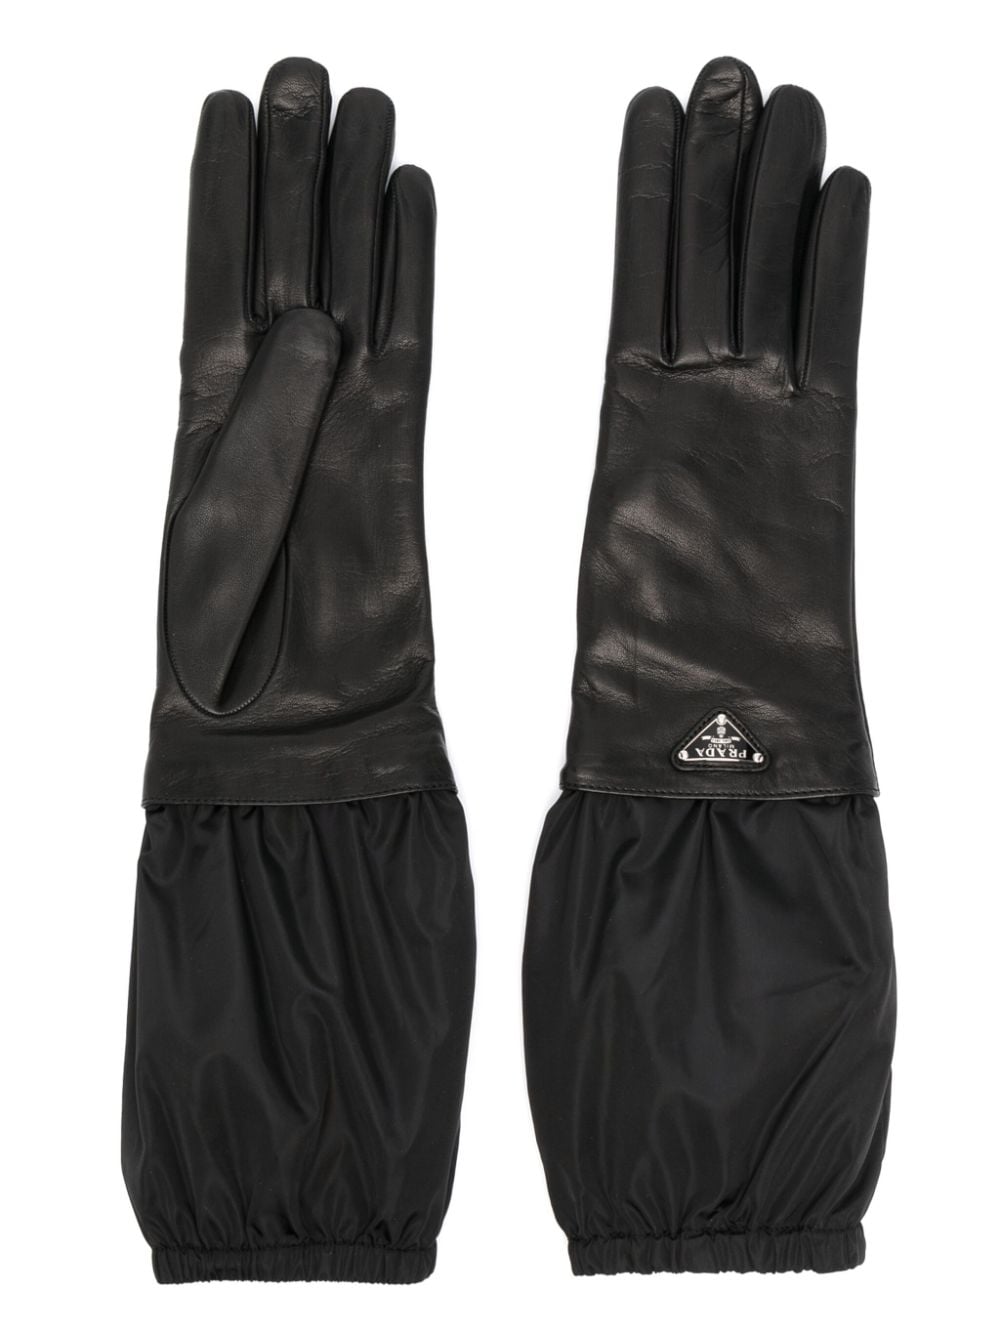 Triangle-logo leater gloves